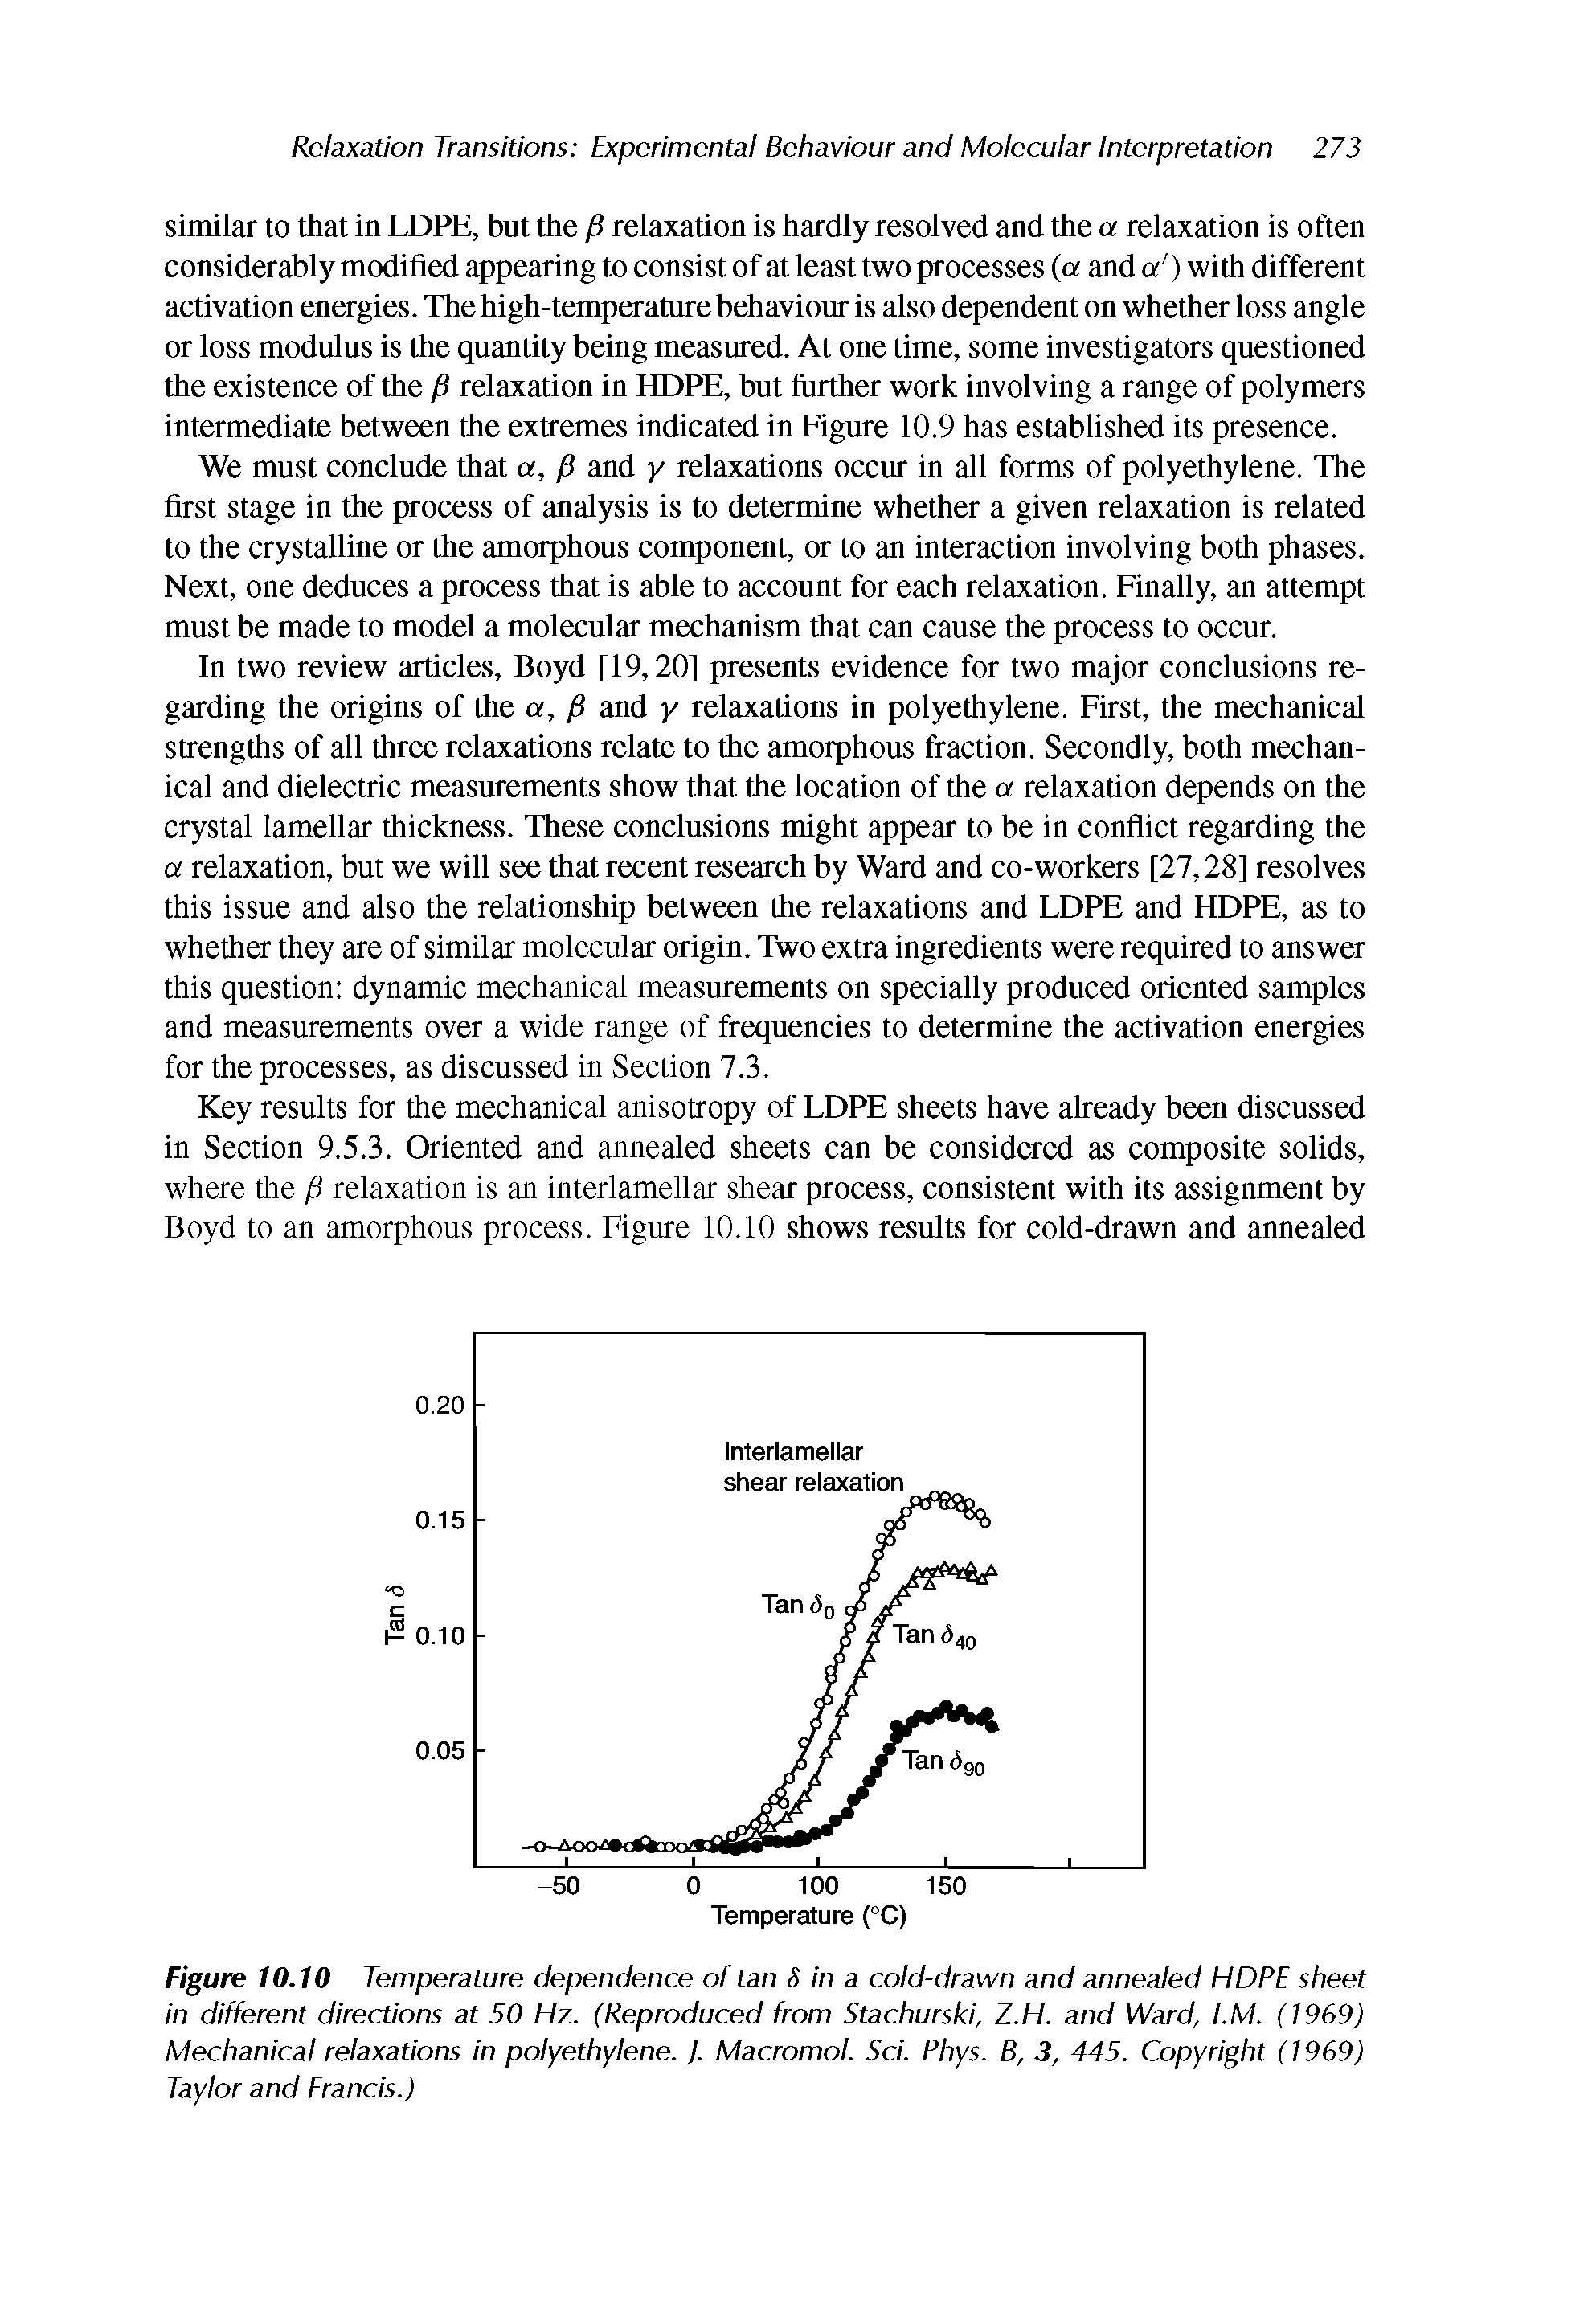 Figure 10.10 Temperature dependence of tan S in a cold-drawn and annealed HDPE sheet in different directions at 50 Hz. (Reproduced from Stachurski, Z.H. and Ward, I.M. (1969) Mechanical relaxations in polyethylene. J. Macromol. Sci. Phys. B, 3, 445. Copyright (1969) Taylor and Francis.)...